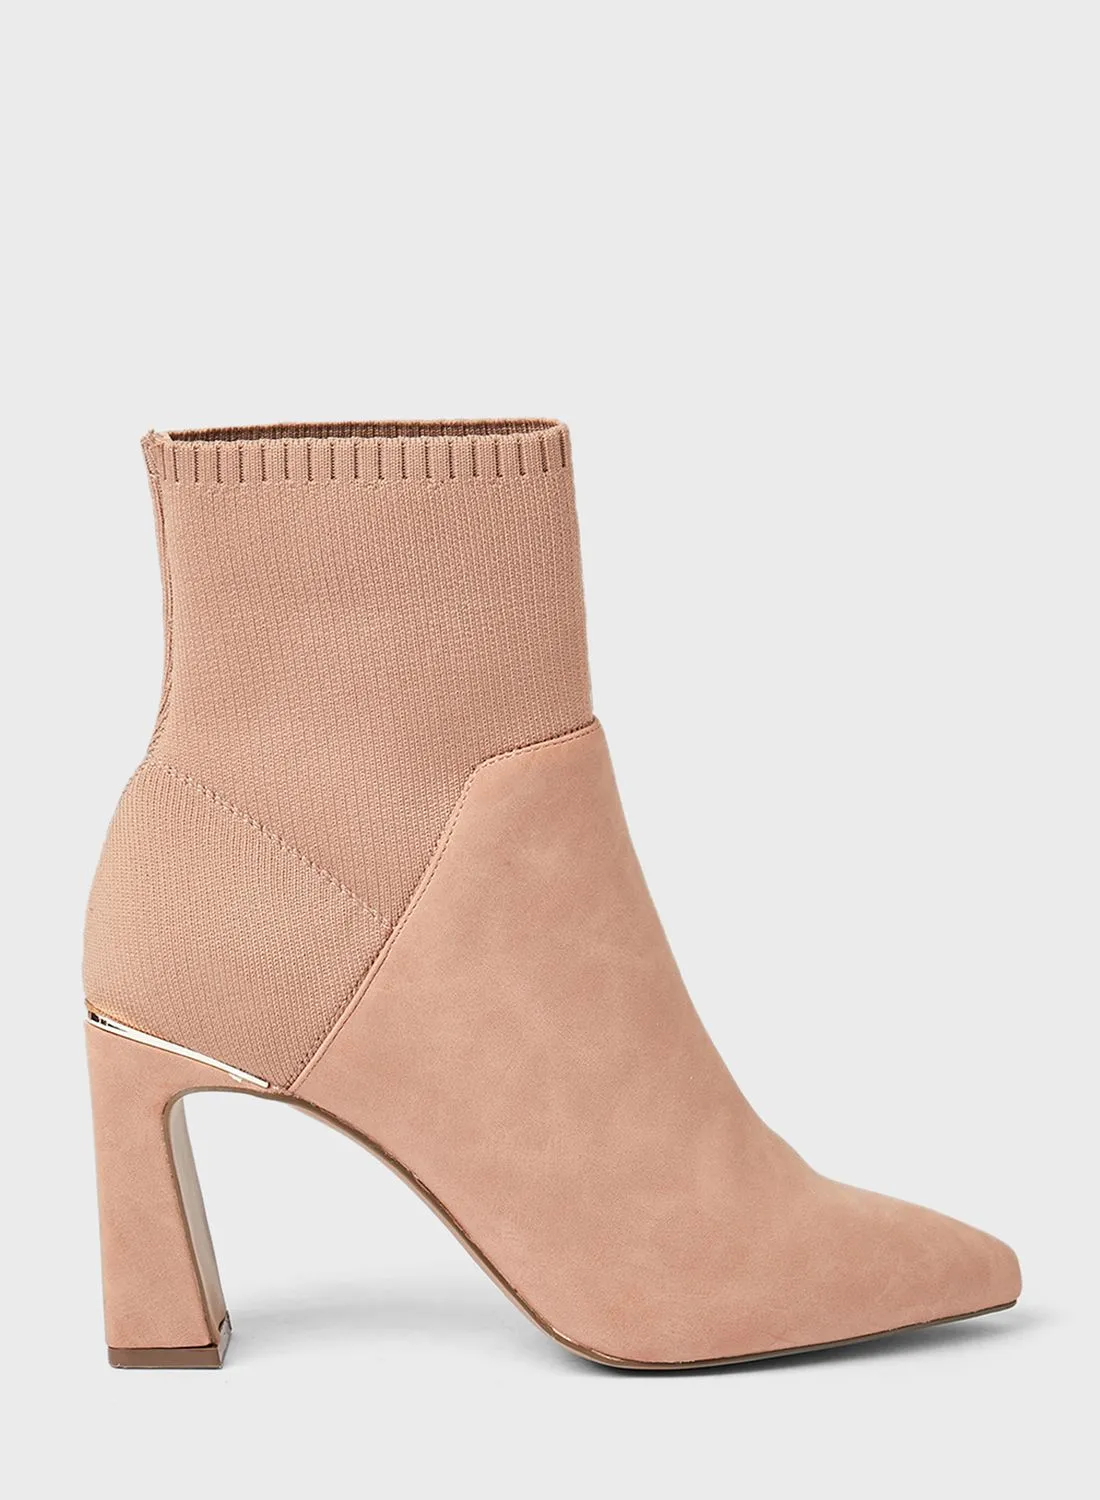 CALL IT SPRING Loiwen Ankle Boots